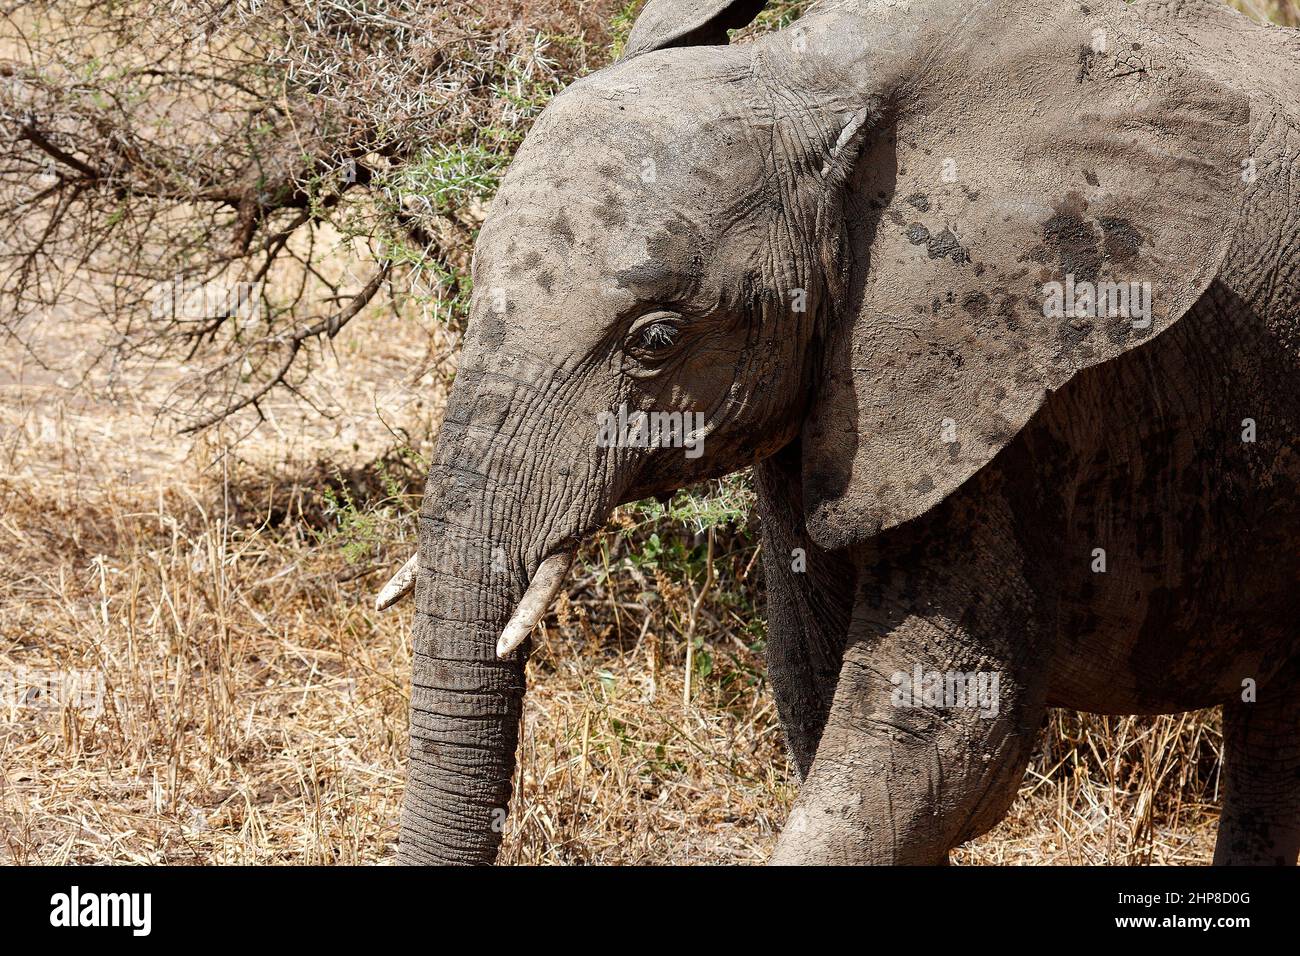 African elephant, close-up, caked with mud, texture, head, large ear, Loxodanta africana, herbivore, largest land mammal, muscular trunk, tusks, wildl Stock Photo